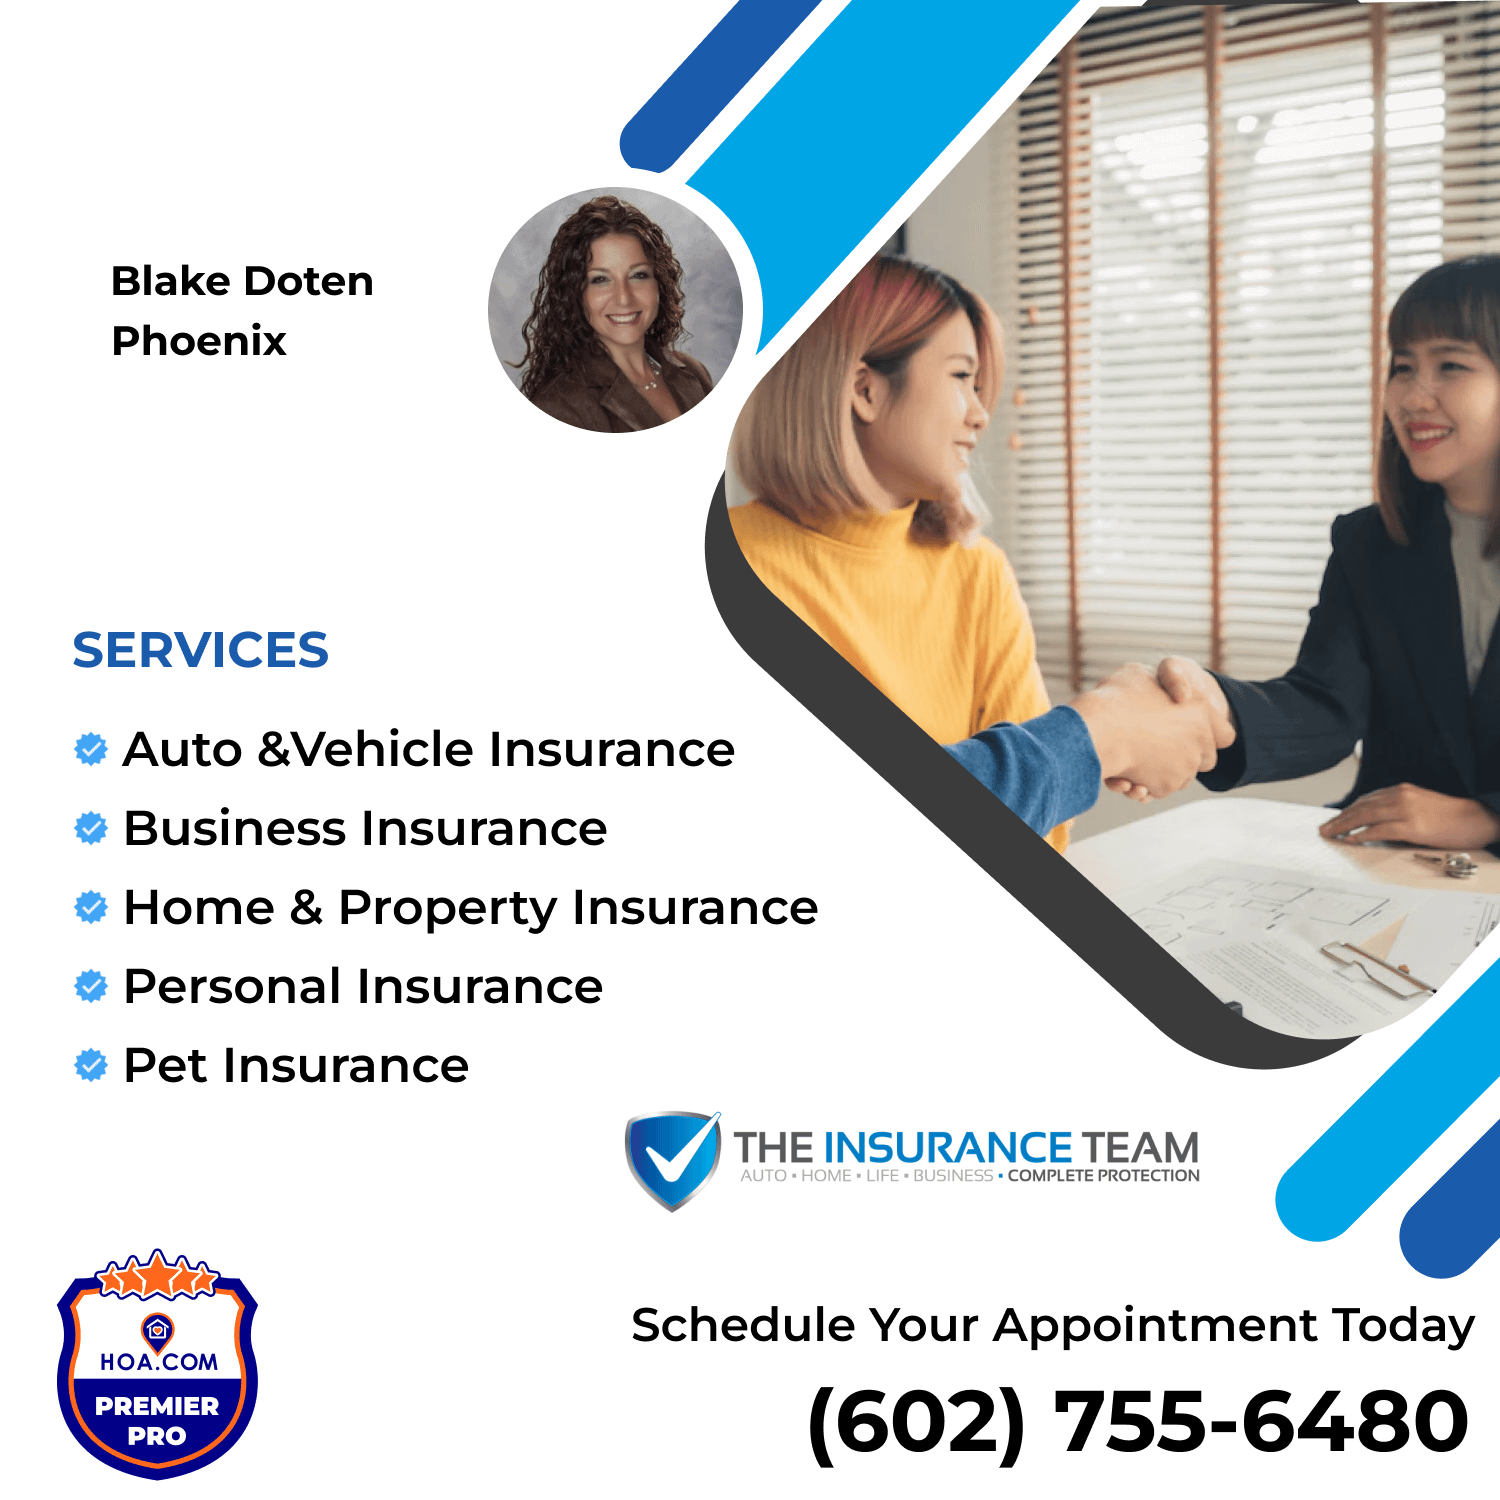 The Insurance Team Services